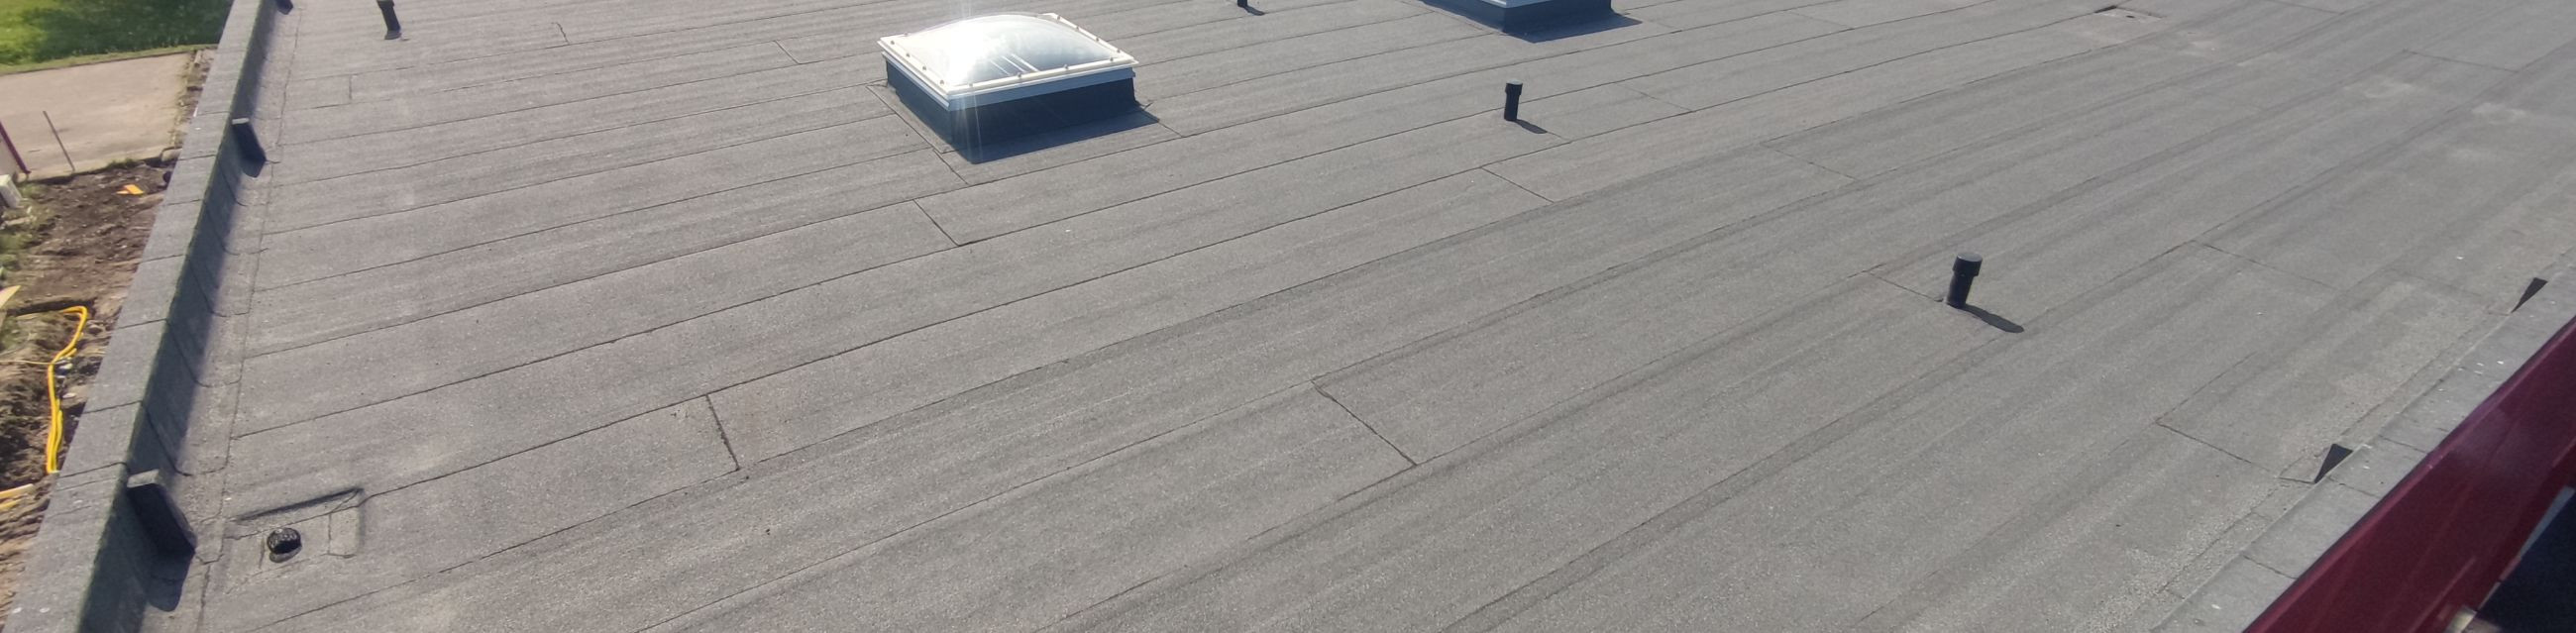 establishment of ventilation, repair of sbs roofs, sbs roof management, modification of sbs roofs, roof design, insulation, replacement of roof cover, maintenance work, installation of chimney caps, construction of vents